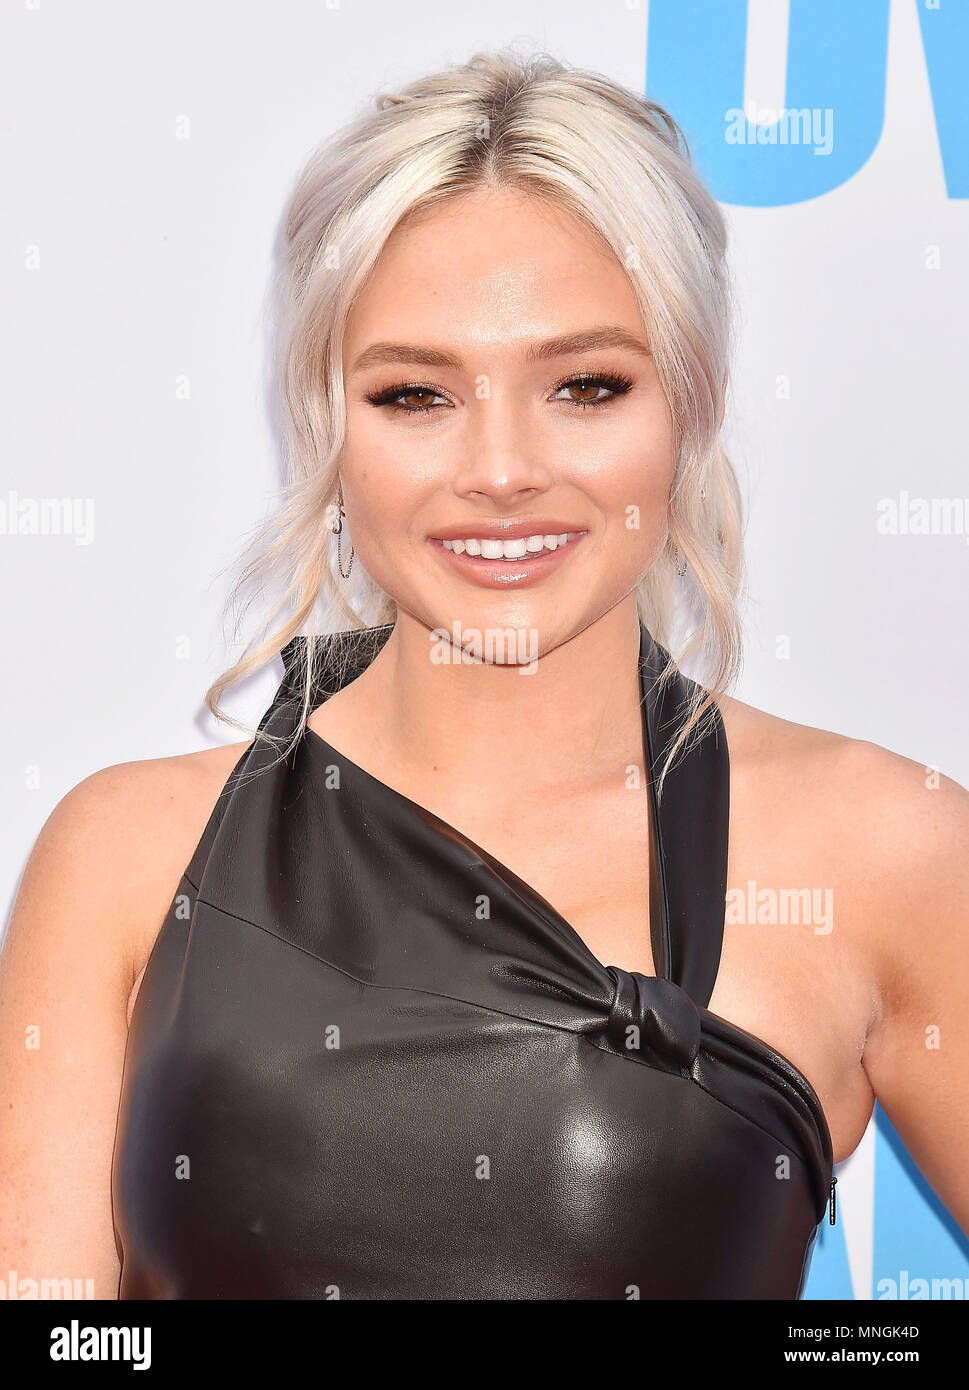 Natalie Alyn Lind High Resolution Stock Photography and Images   Alamy